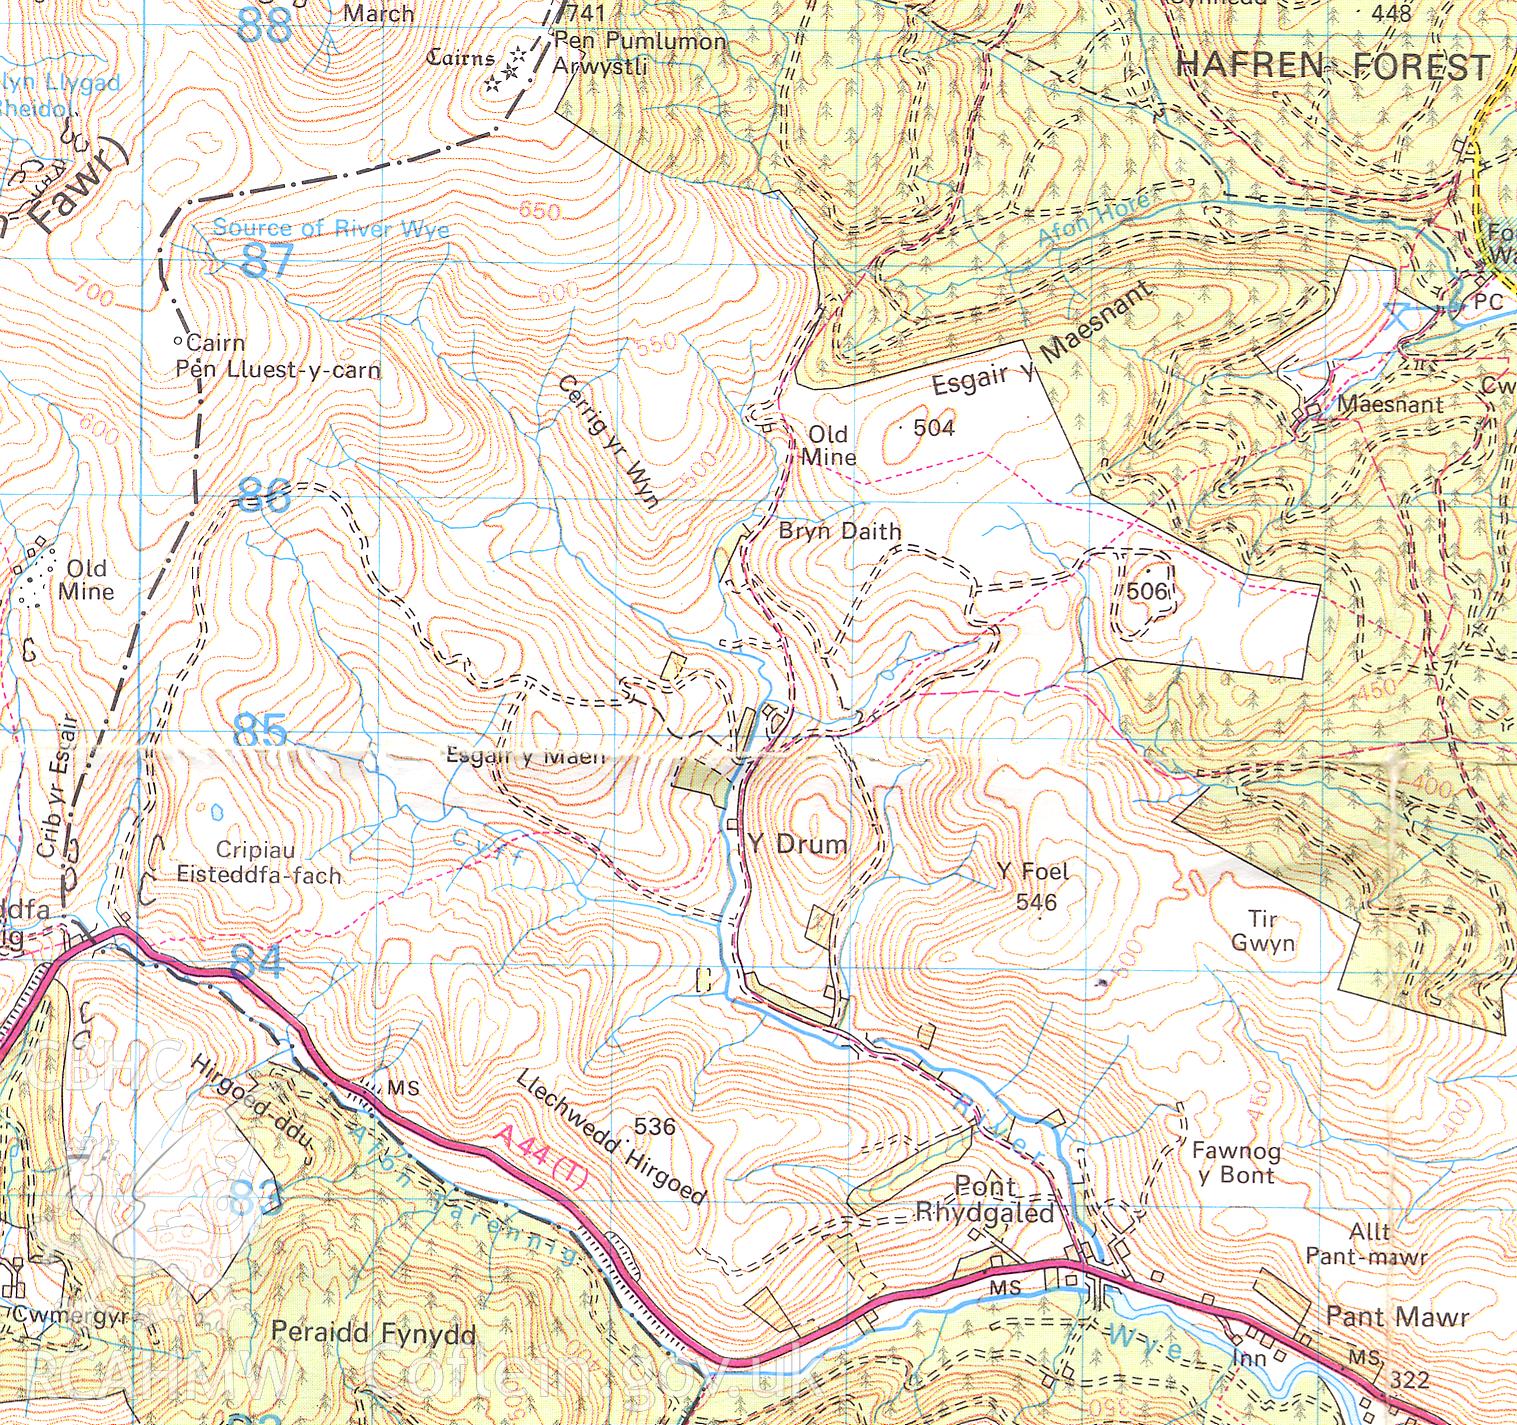 Part of an OS map showing Y Foel and the surrounding area.